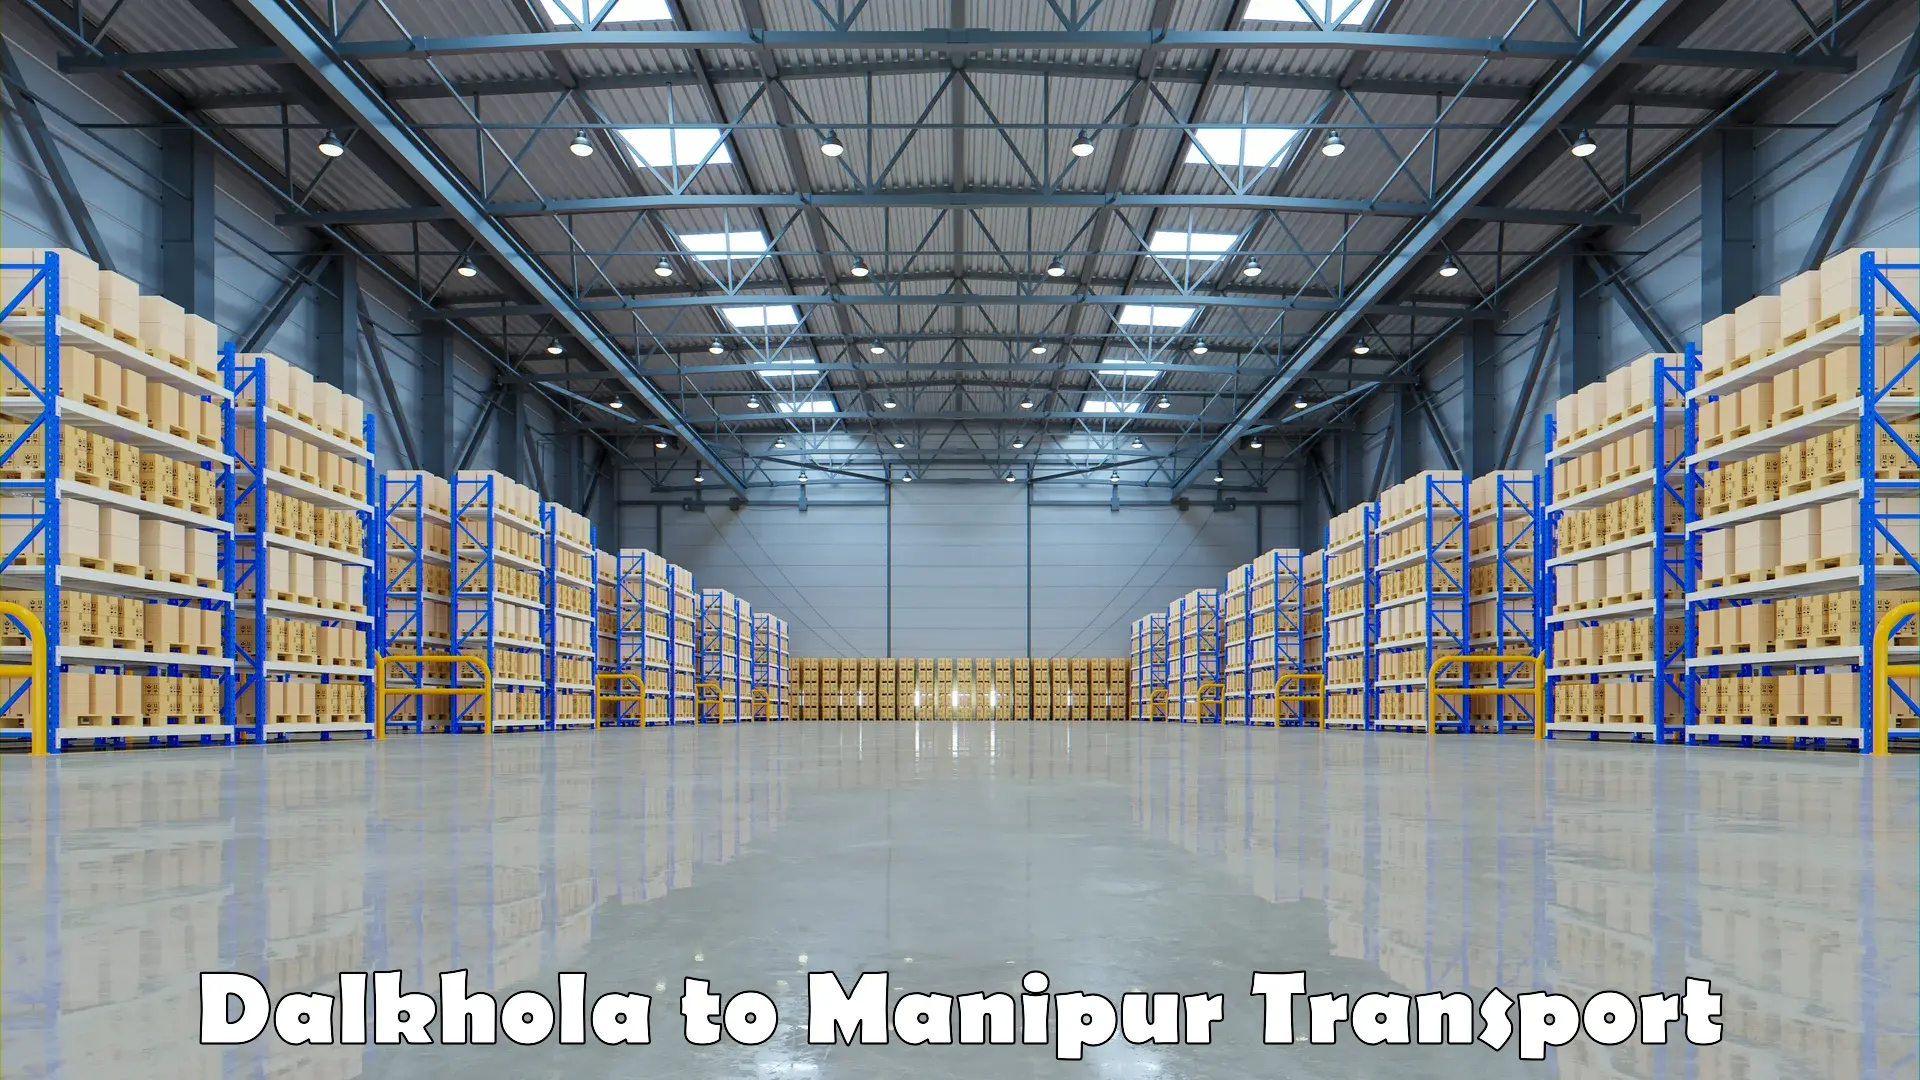 Nearby transport service Dalkhola to Manipur